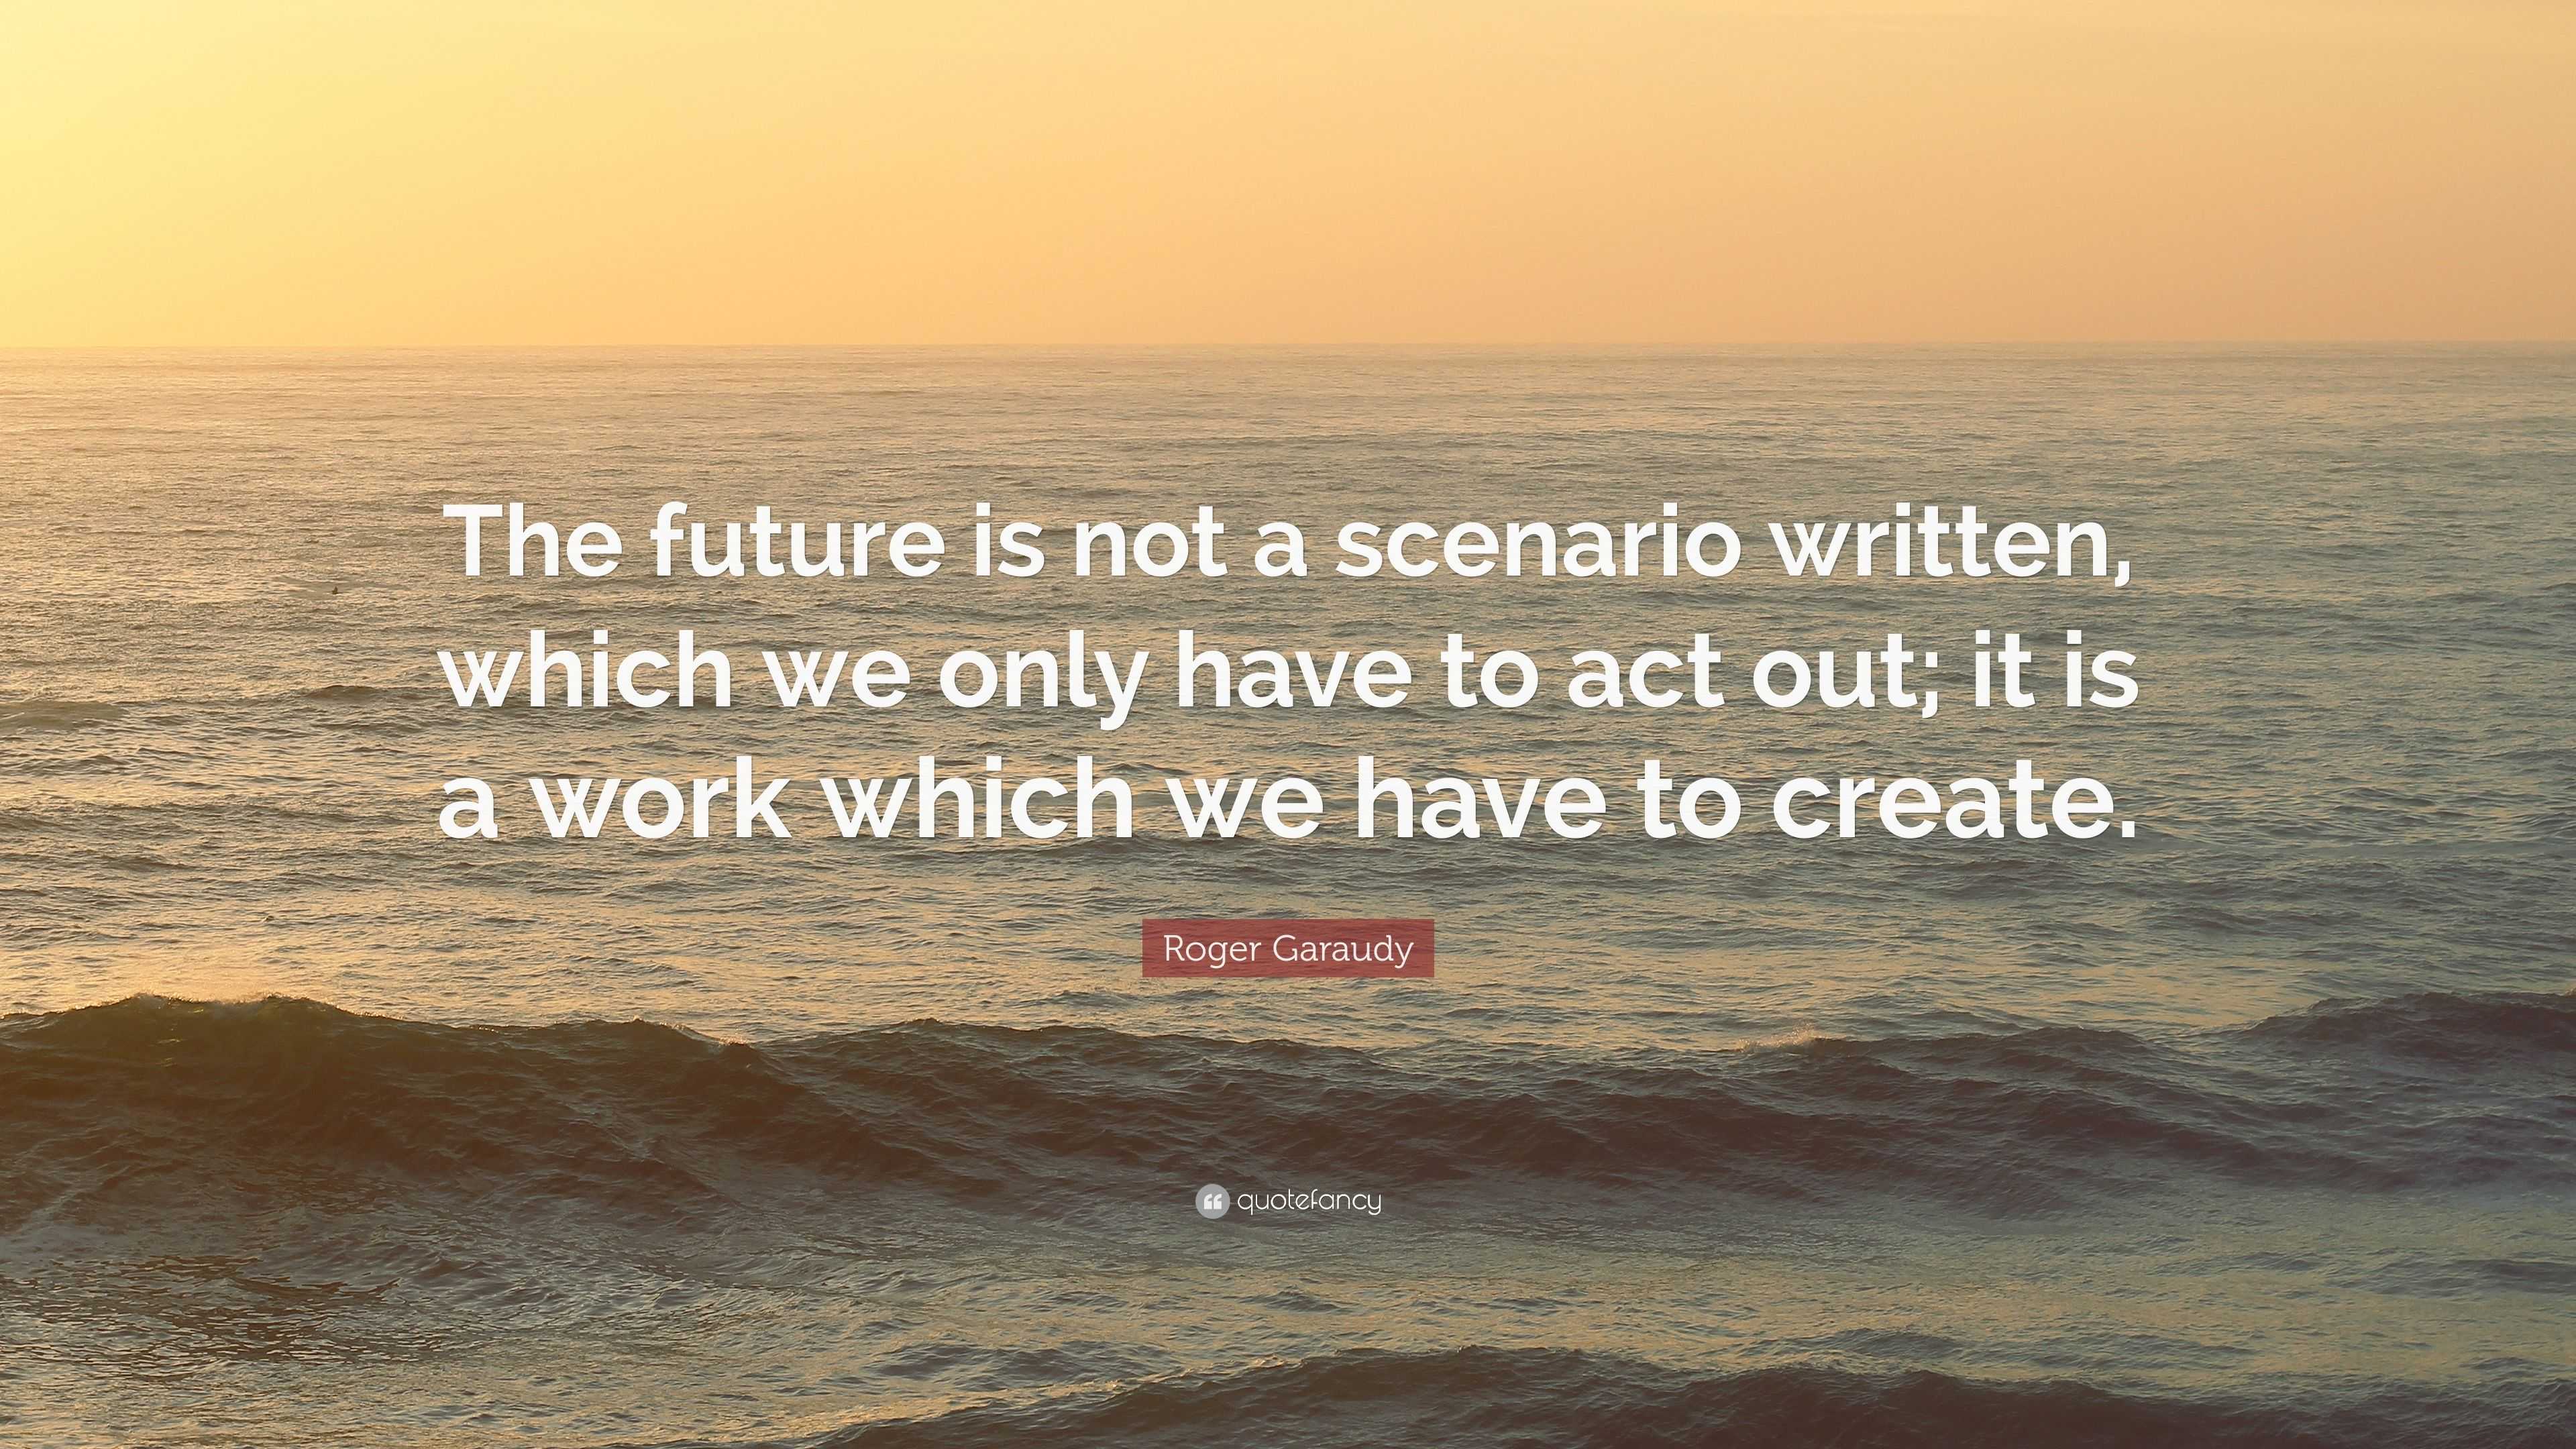 Roger Garaudy Quote: “The future is not a scenario written, which we